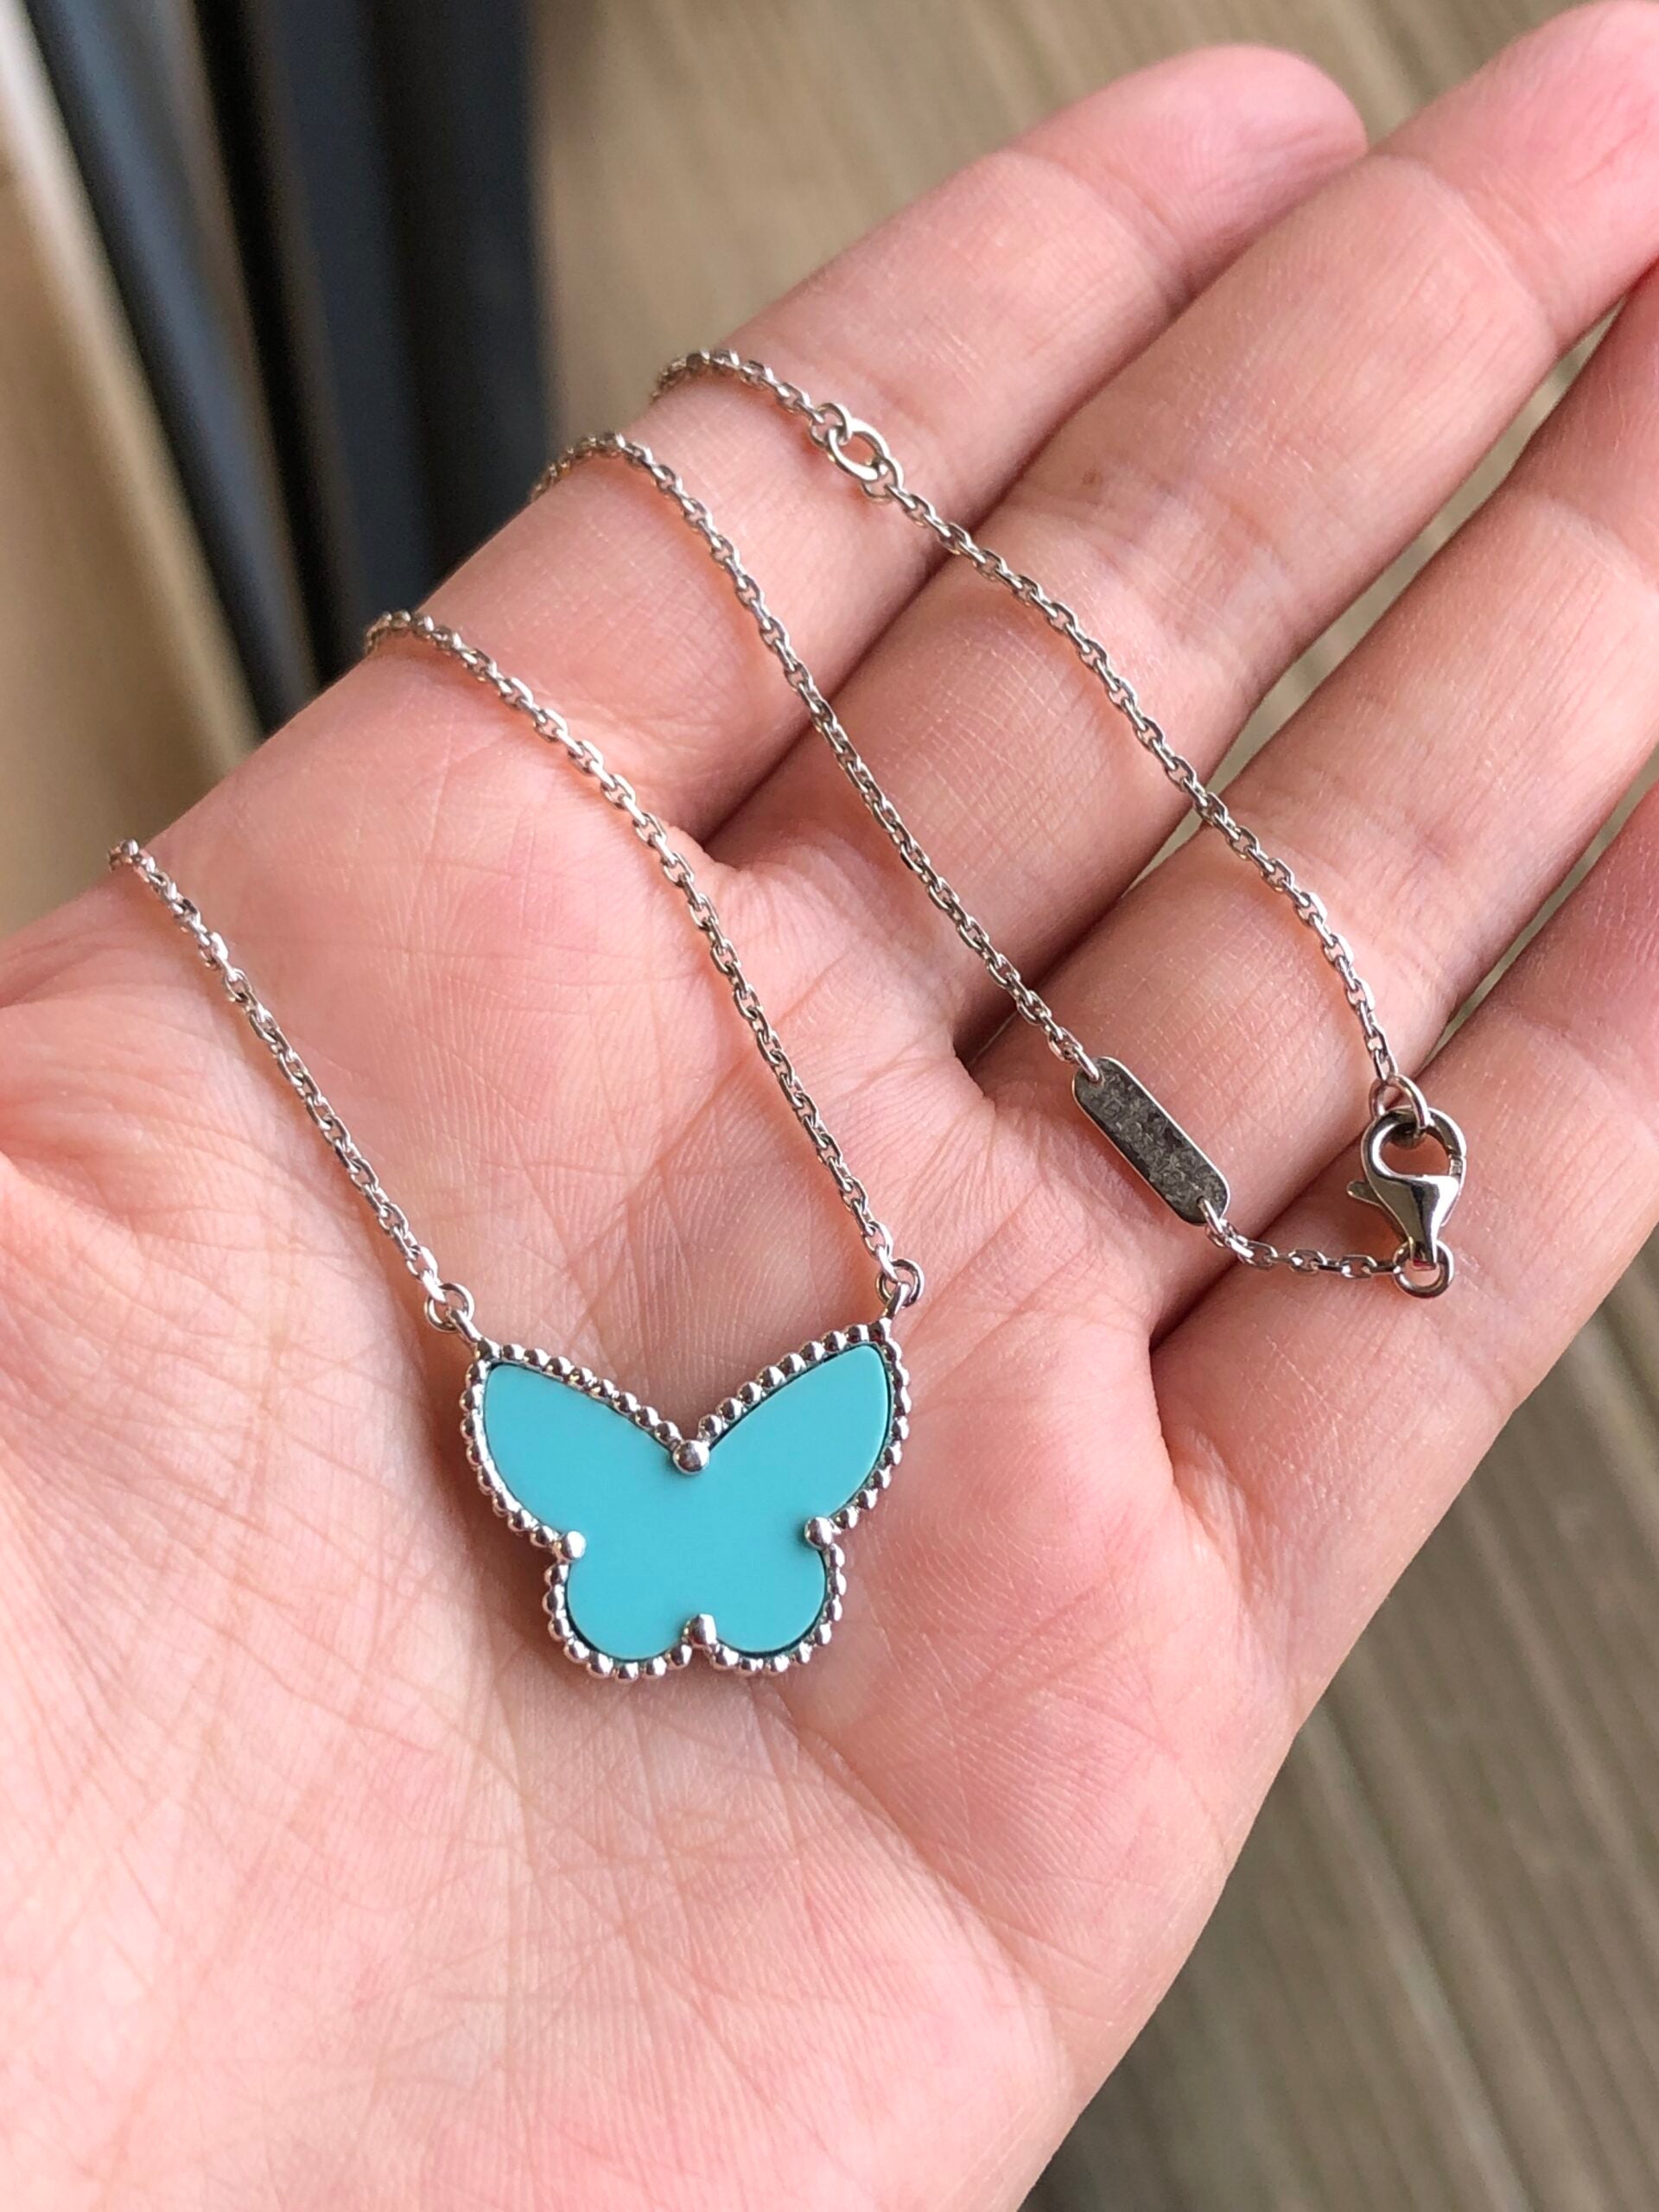 London Blue and Swiss Blue Topaz 14kt White Gold Butterfly Necklace | Costco